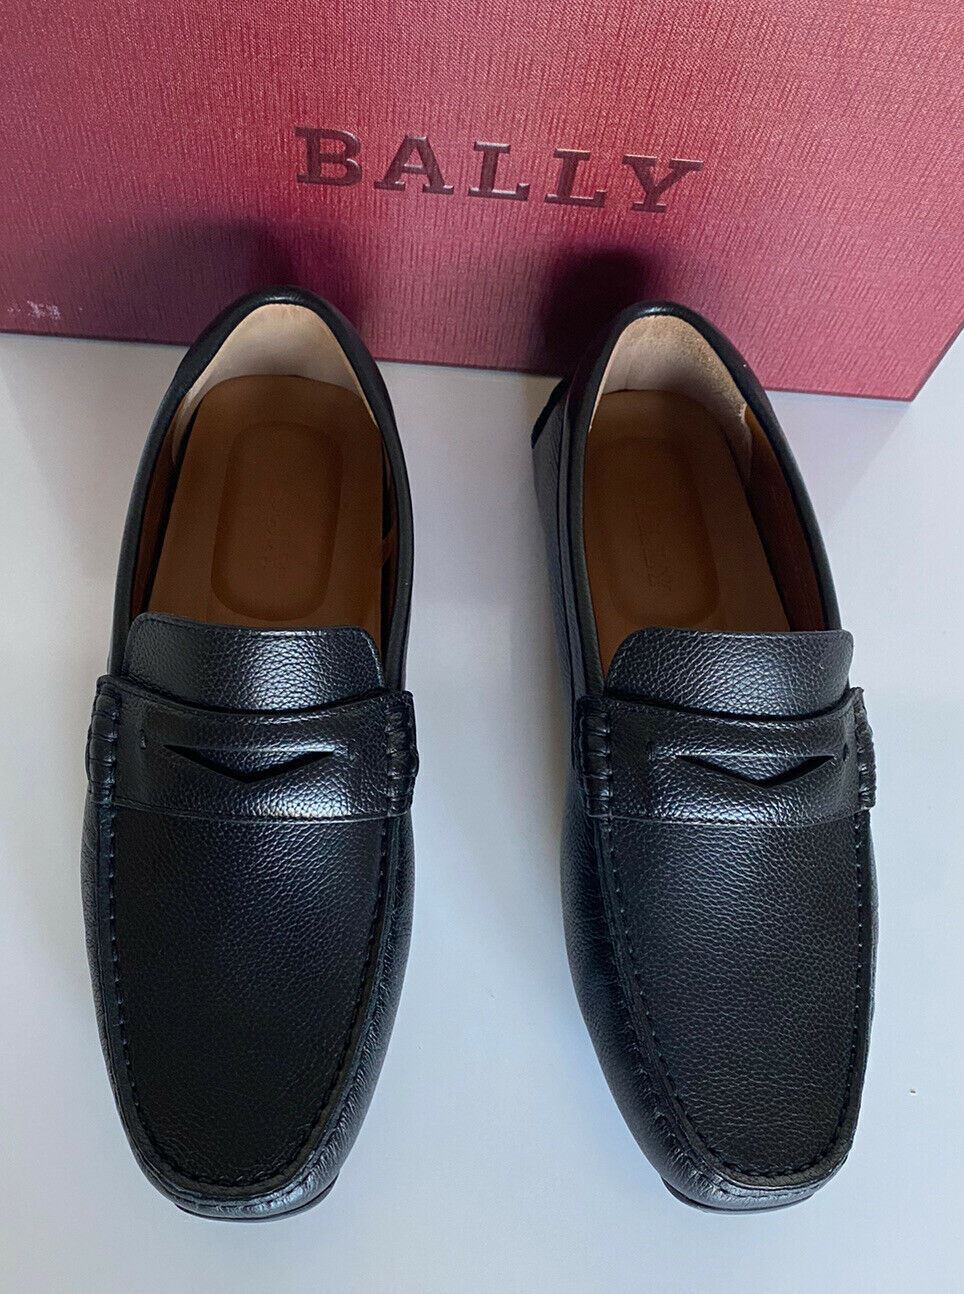 NIB Bally Mens Piotre Grained Leather Driver Loafers Shoes Black 8.5 US 6233869